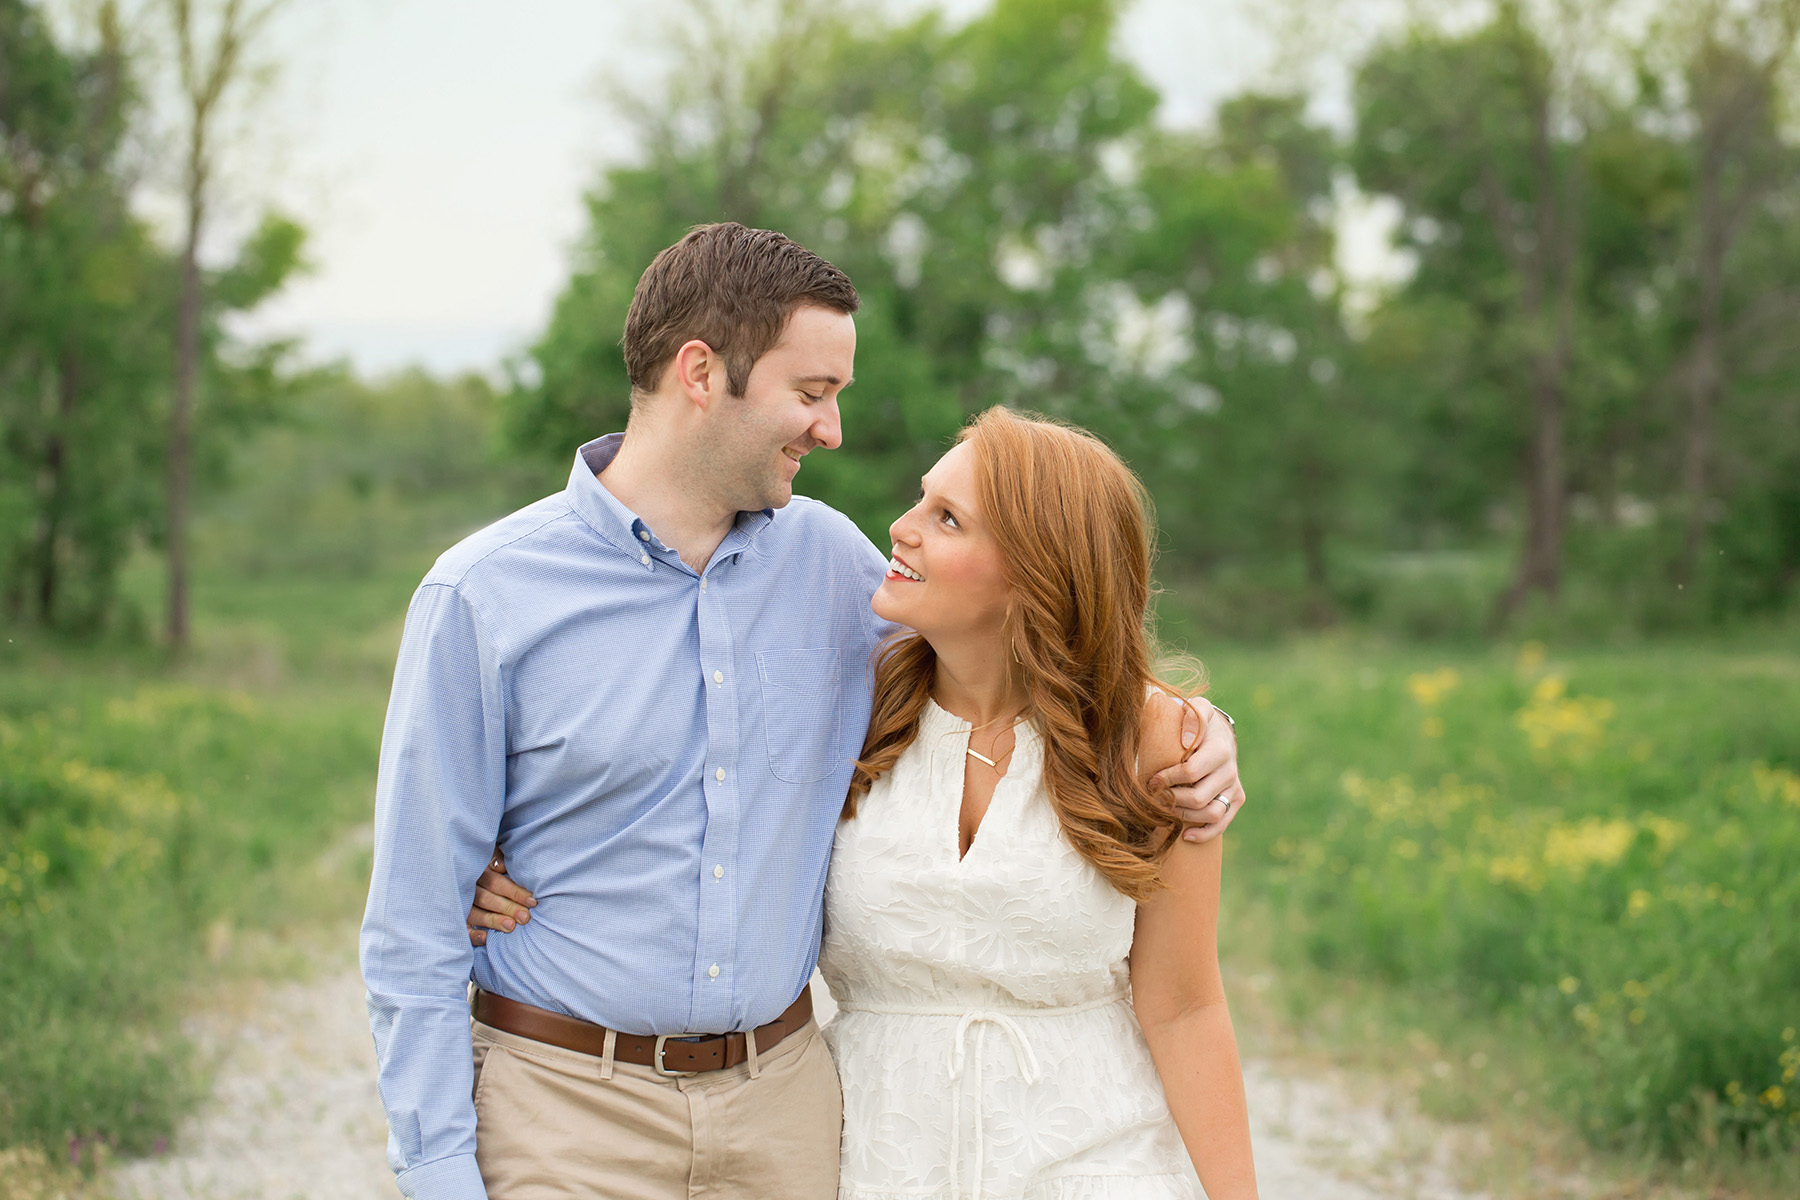 Louisville newborn photographer | julie brock photography | fun pregnancy announcement | louisville maternity photographer | he was surprised by his wife that she is pregnant.jpg